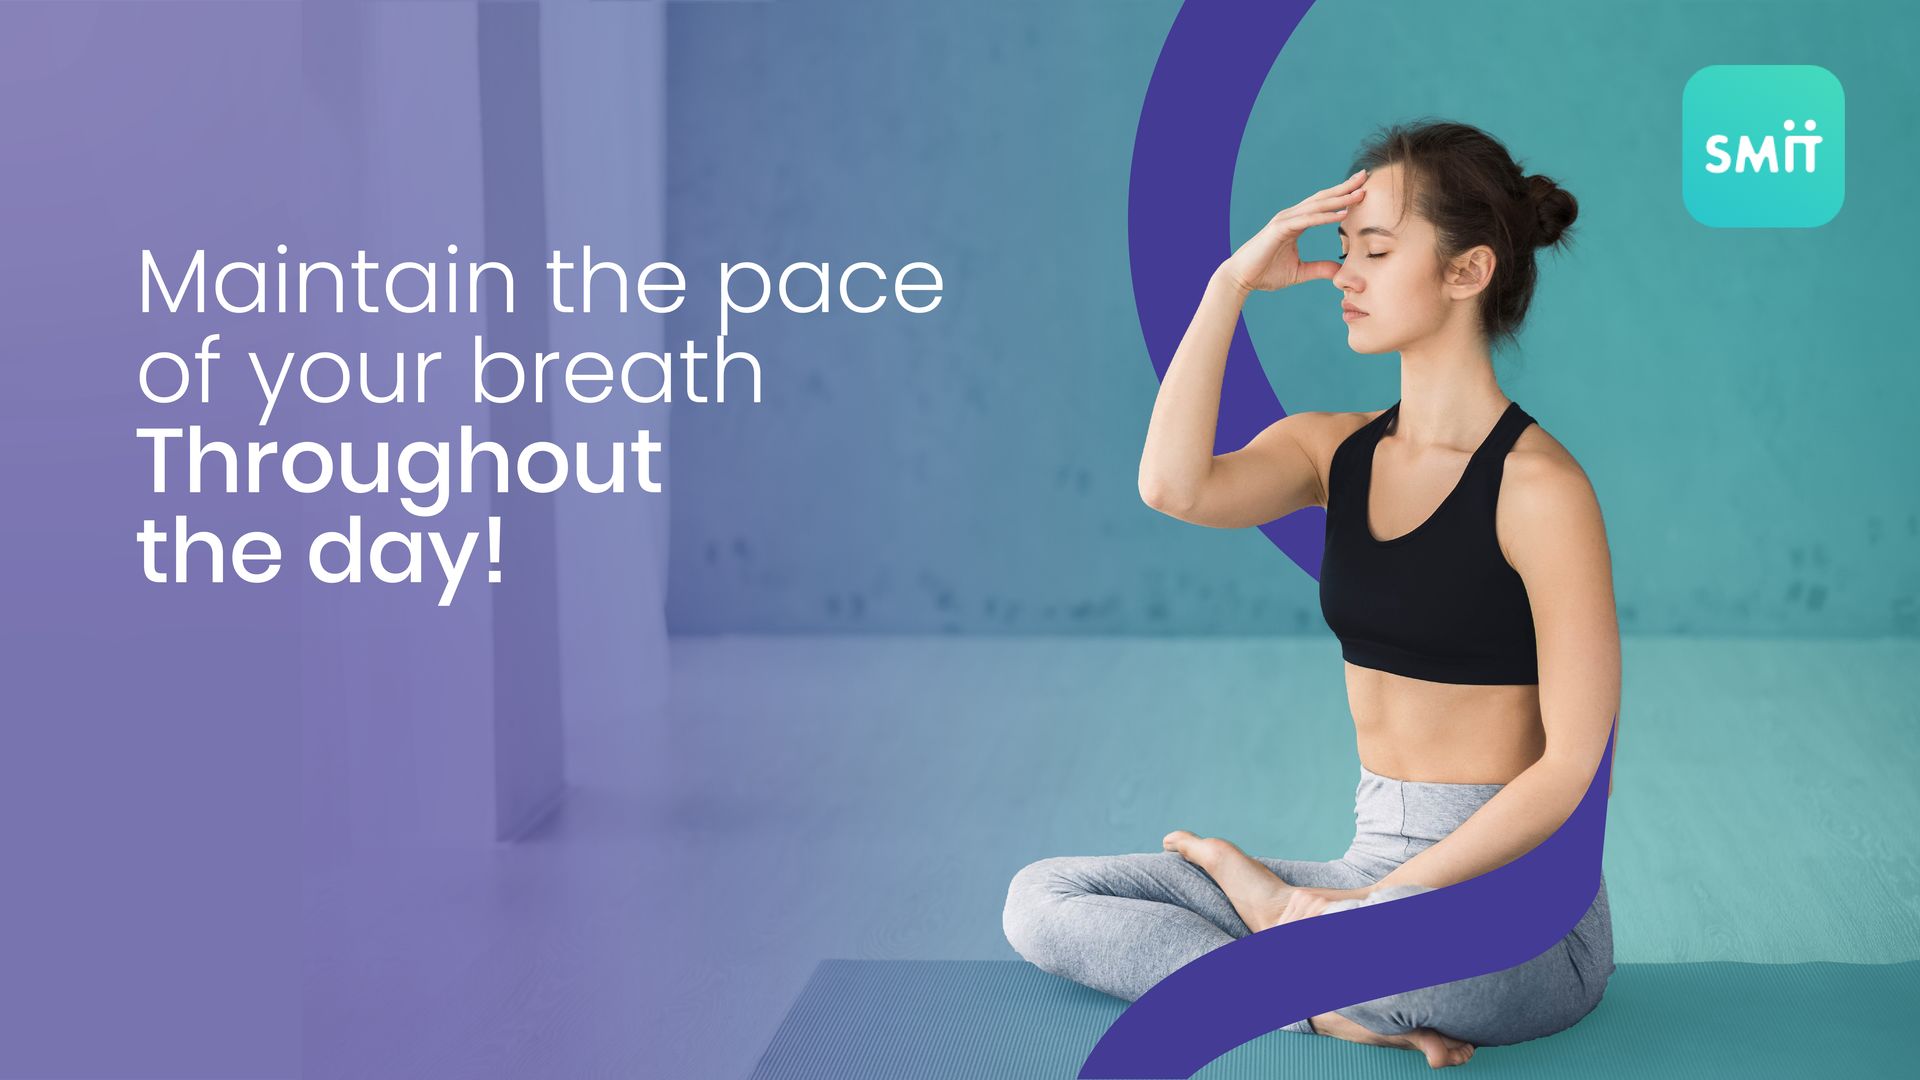 Maintain the pace of your breath throughout the day!